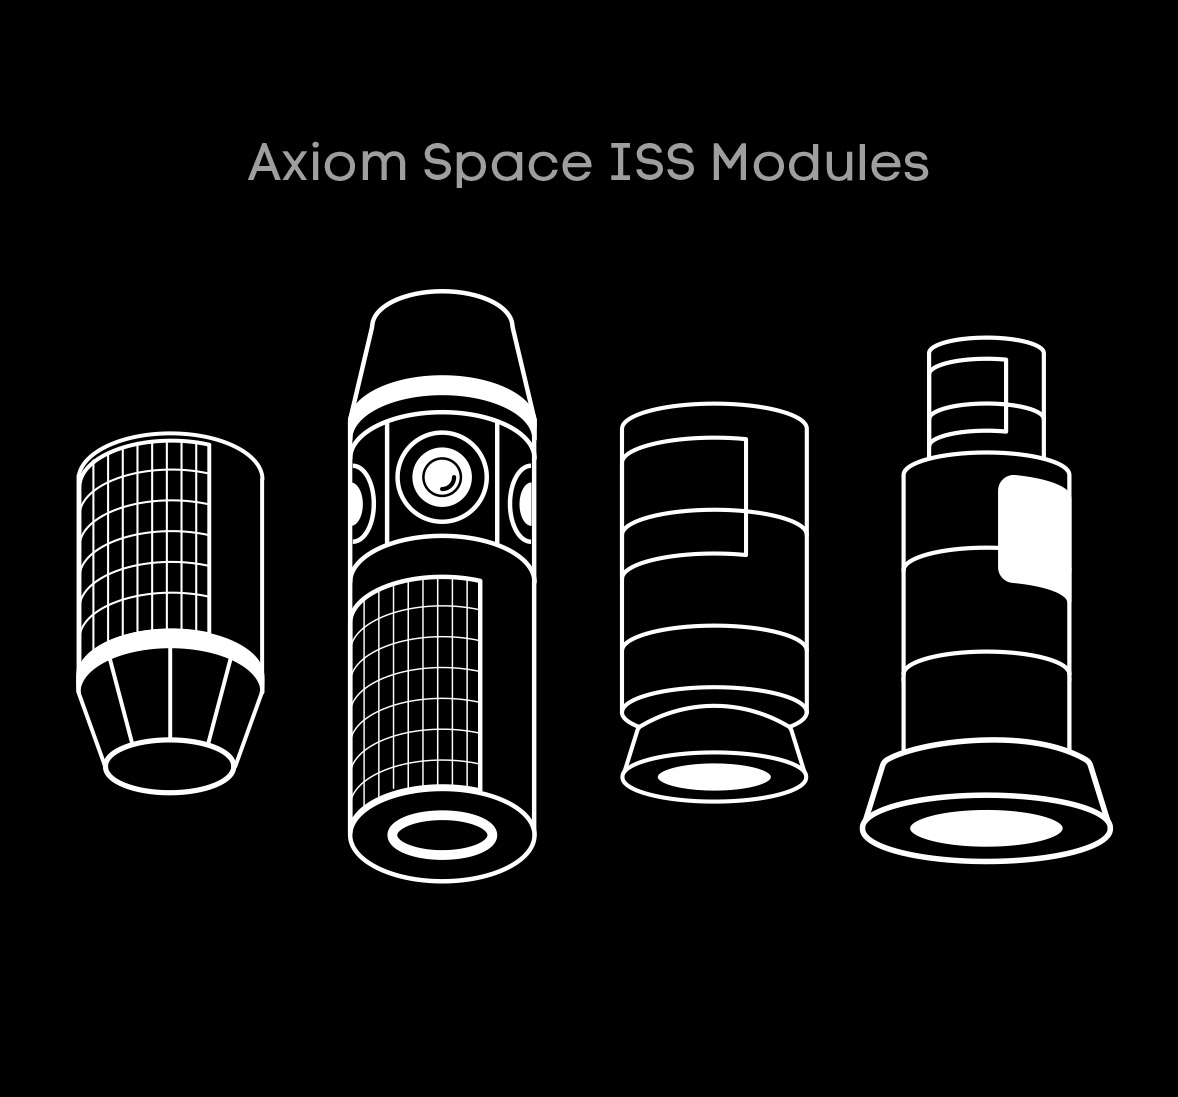 ISS_Modules_001-copy